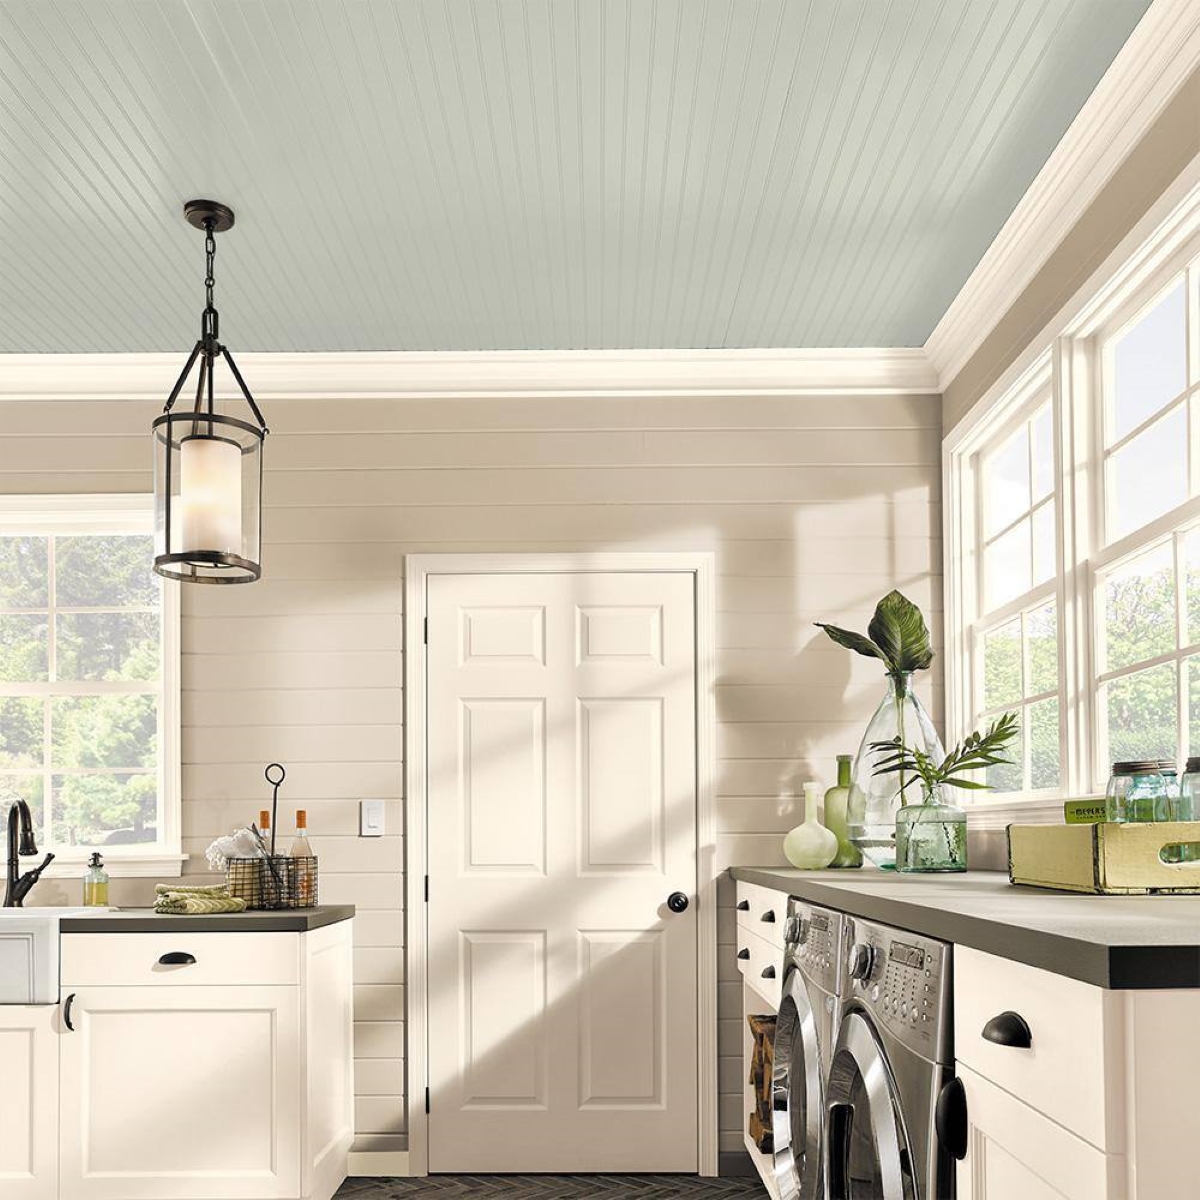 A kitchen and laundry room with a light sage colored ceiling.